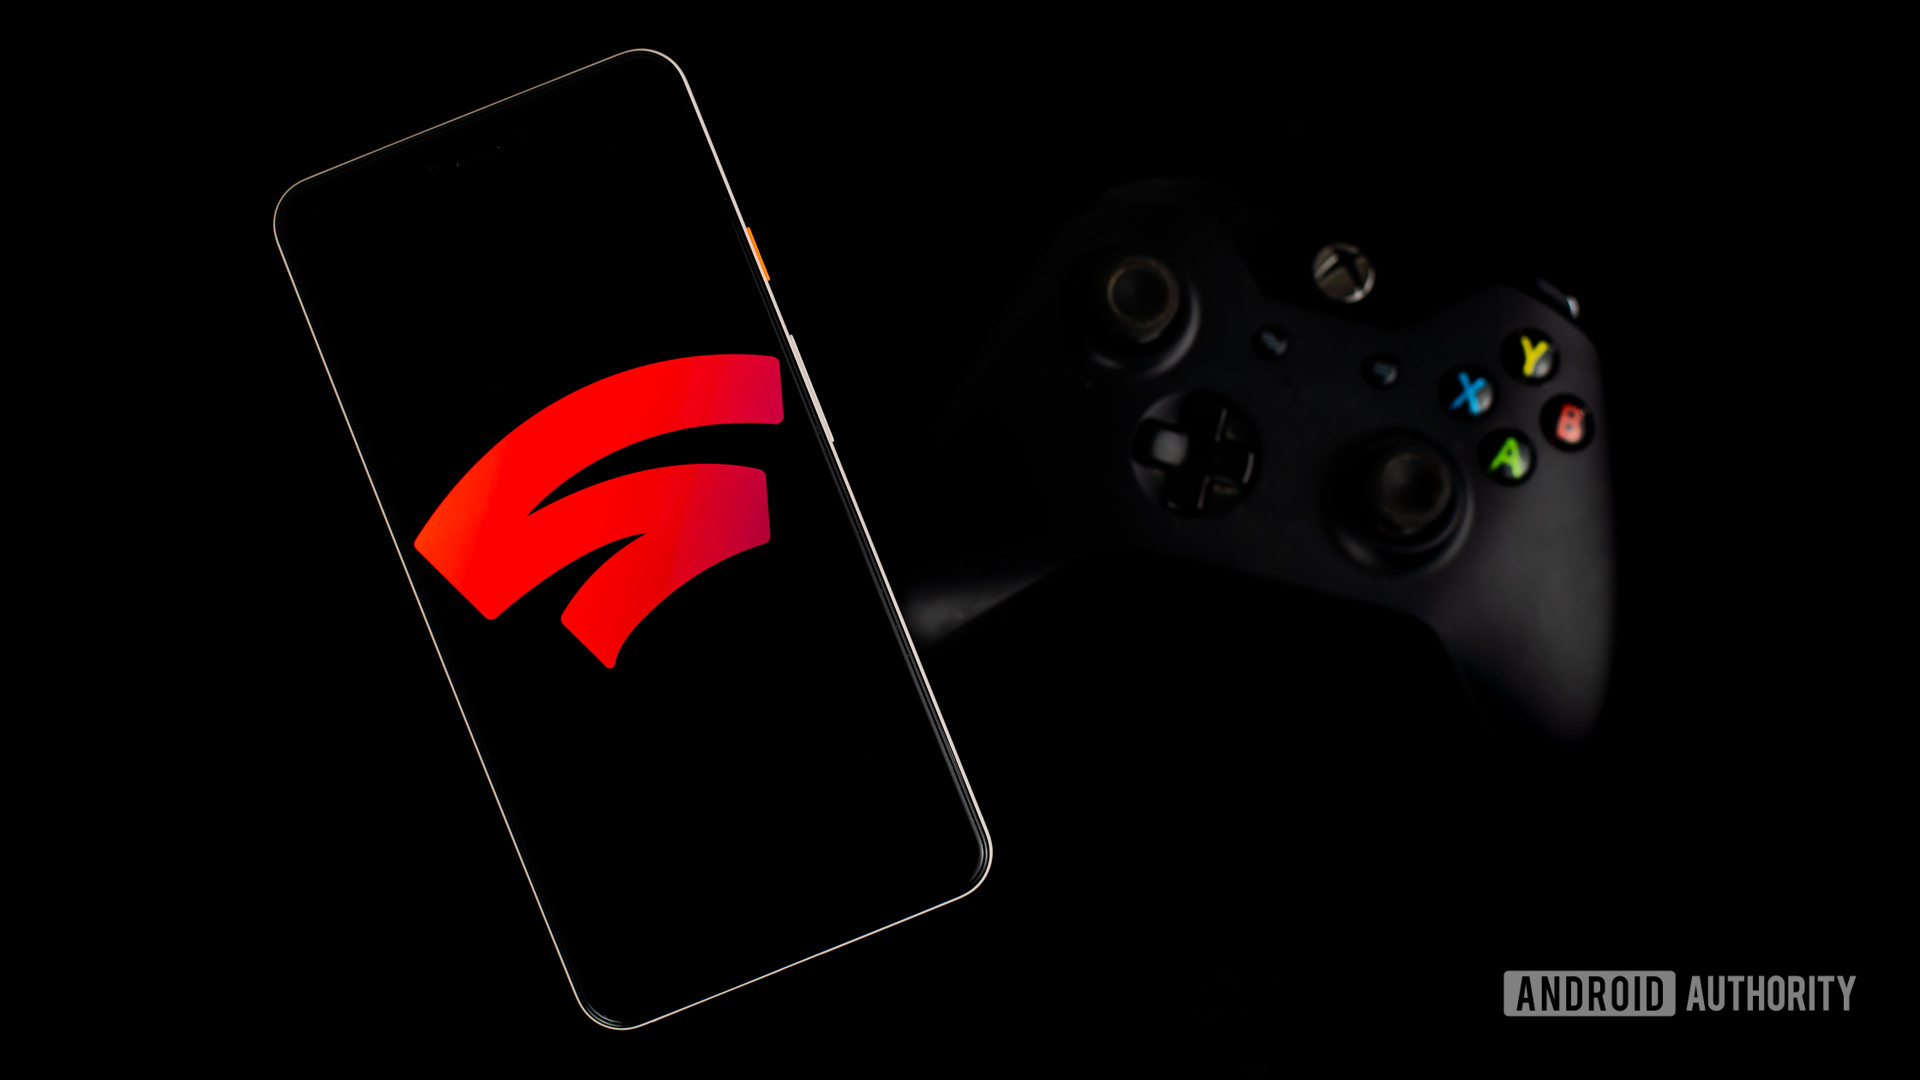 Google Stadia on the smartphone next to the game controller Stock Photo 1